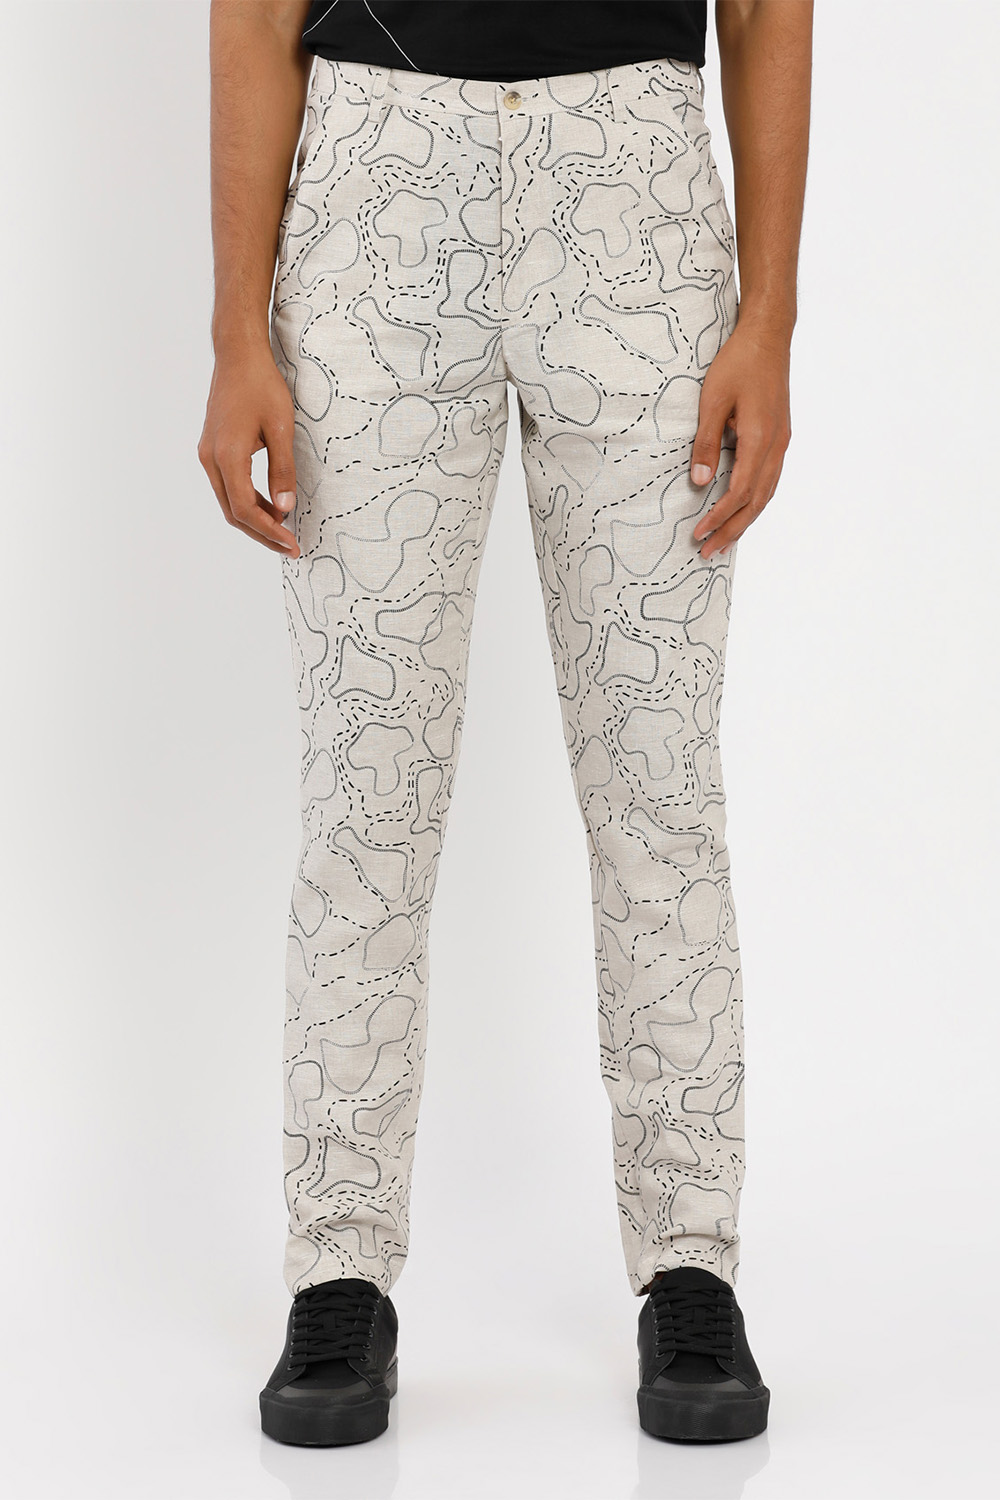 Voyage Toco Trouser